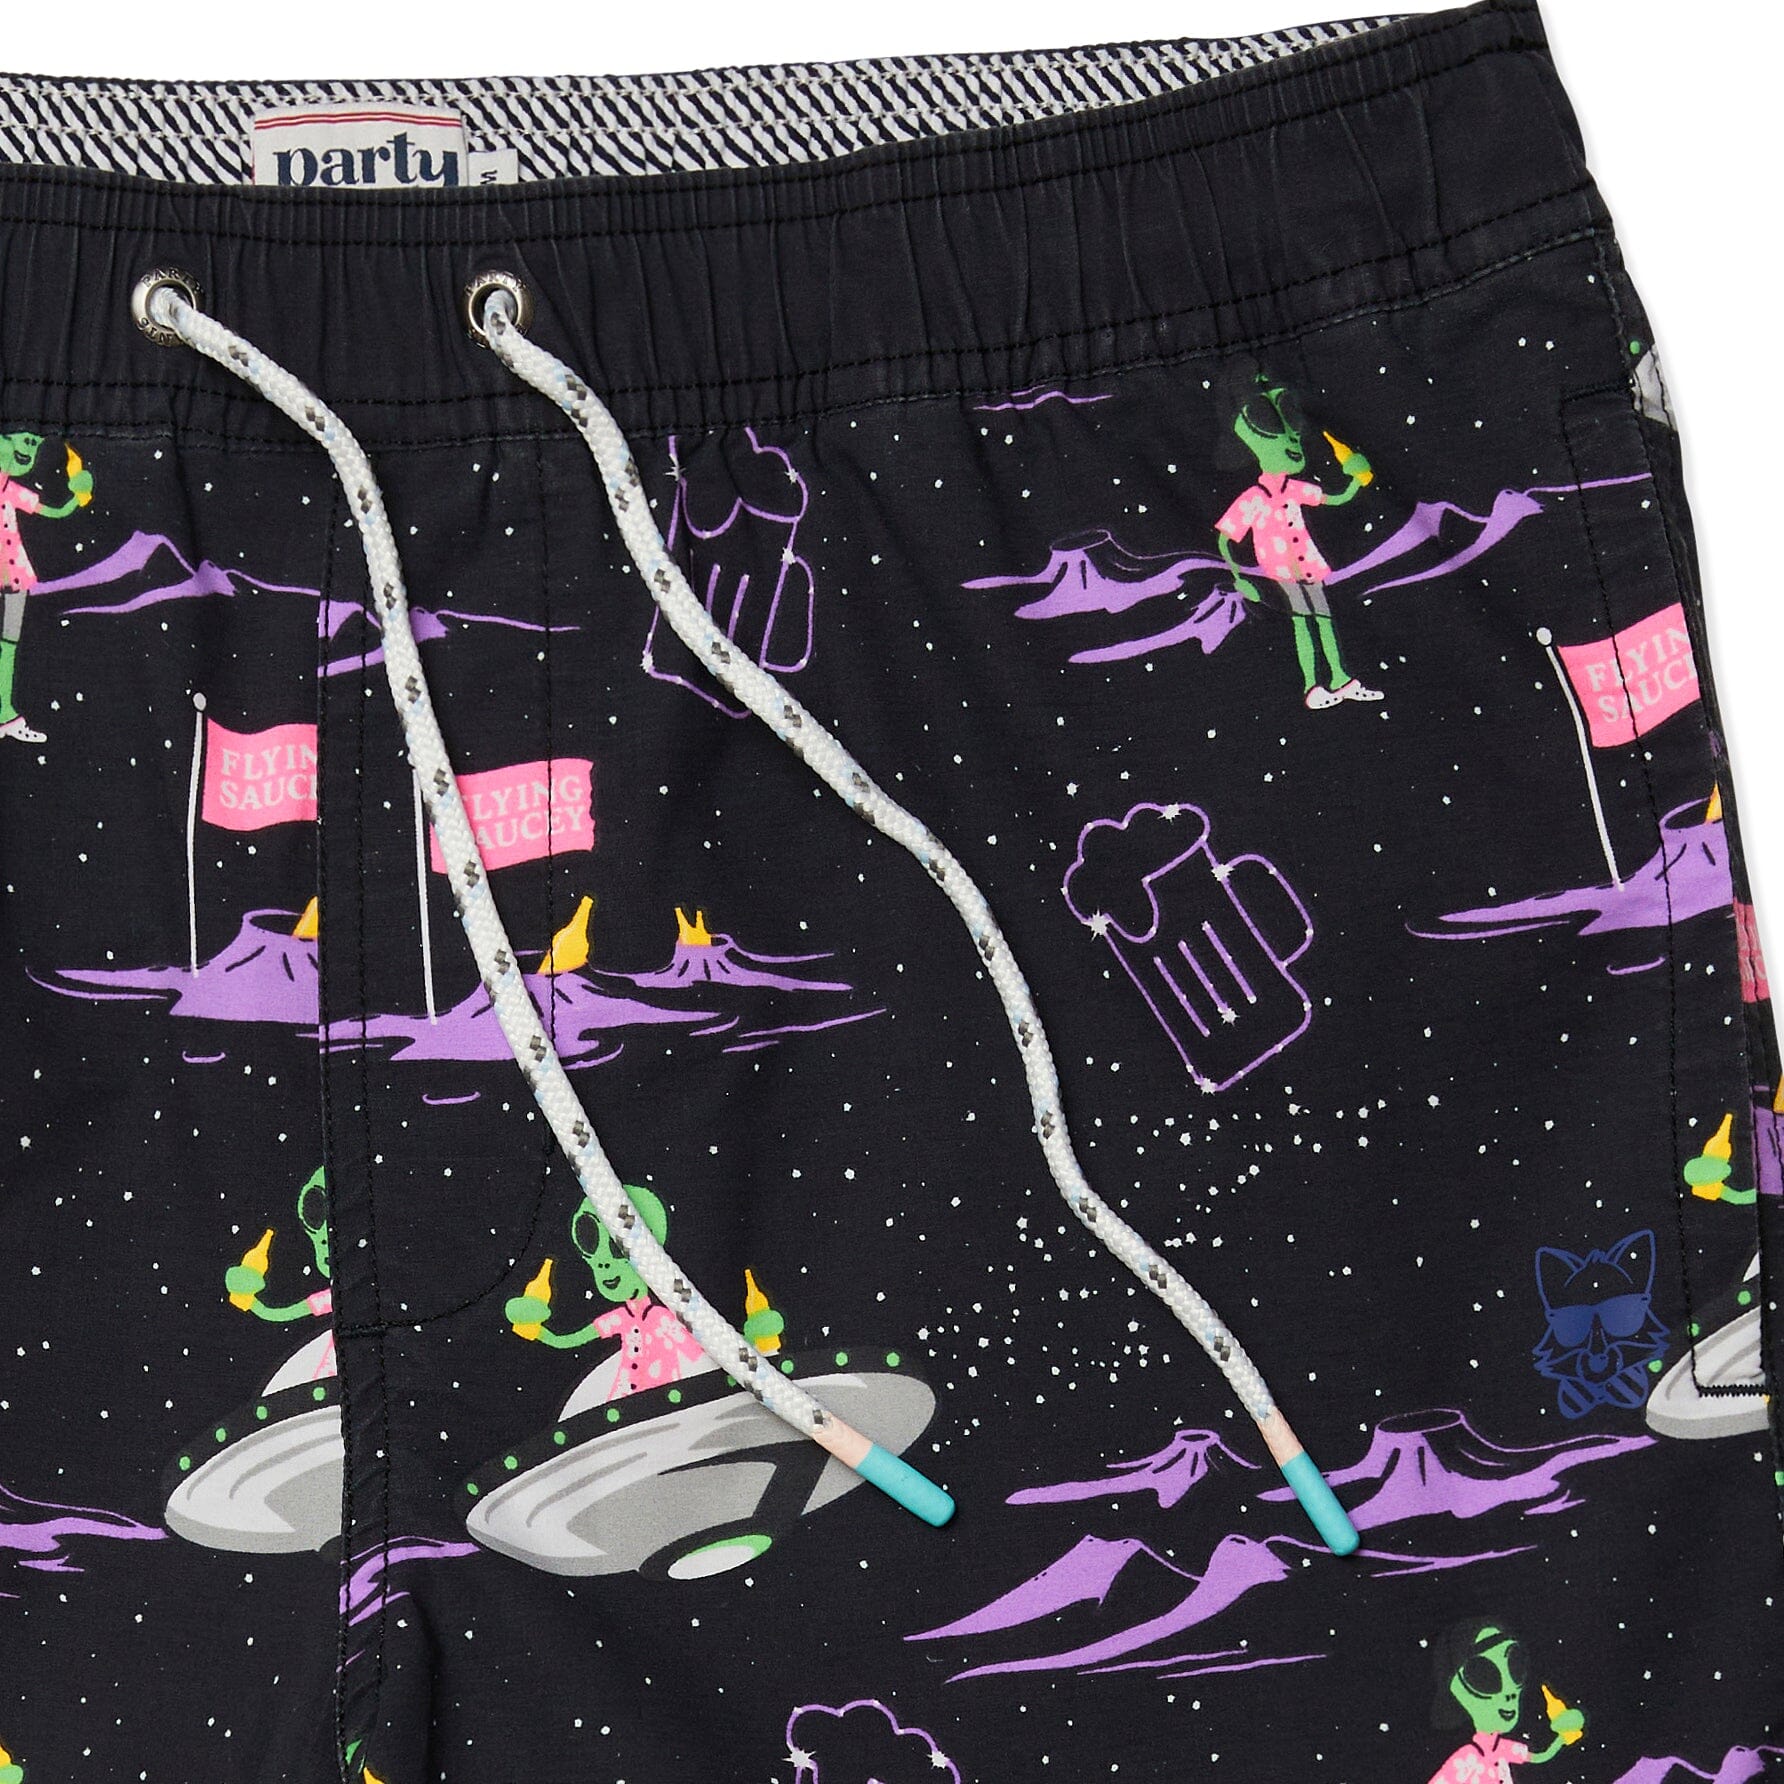 FLYING SAUCEY PARTY STARTER SHORT - BLACK PRINTED SHORTS PARTY PANTS 